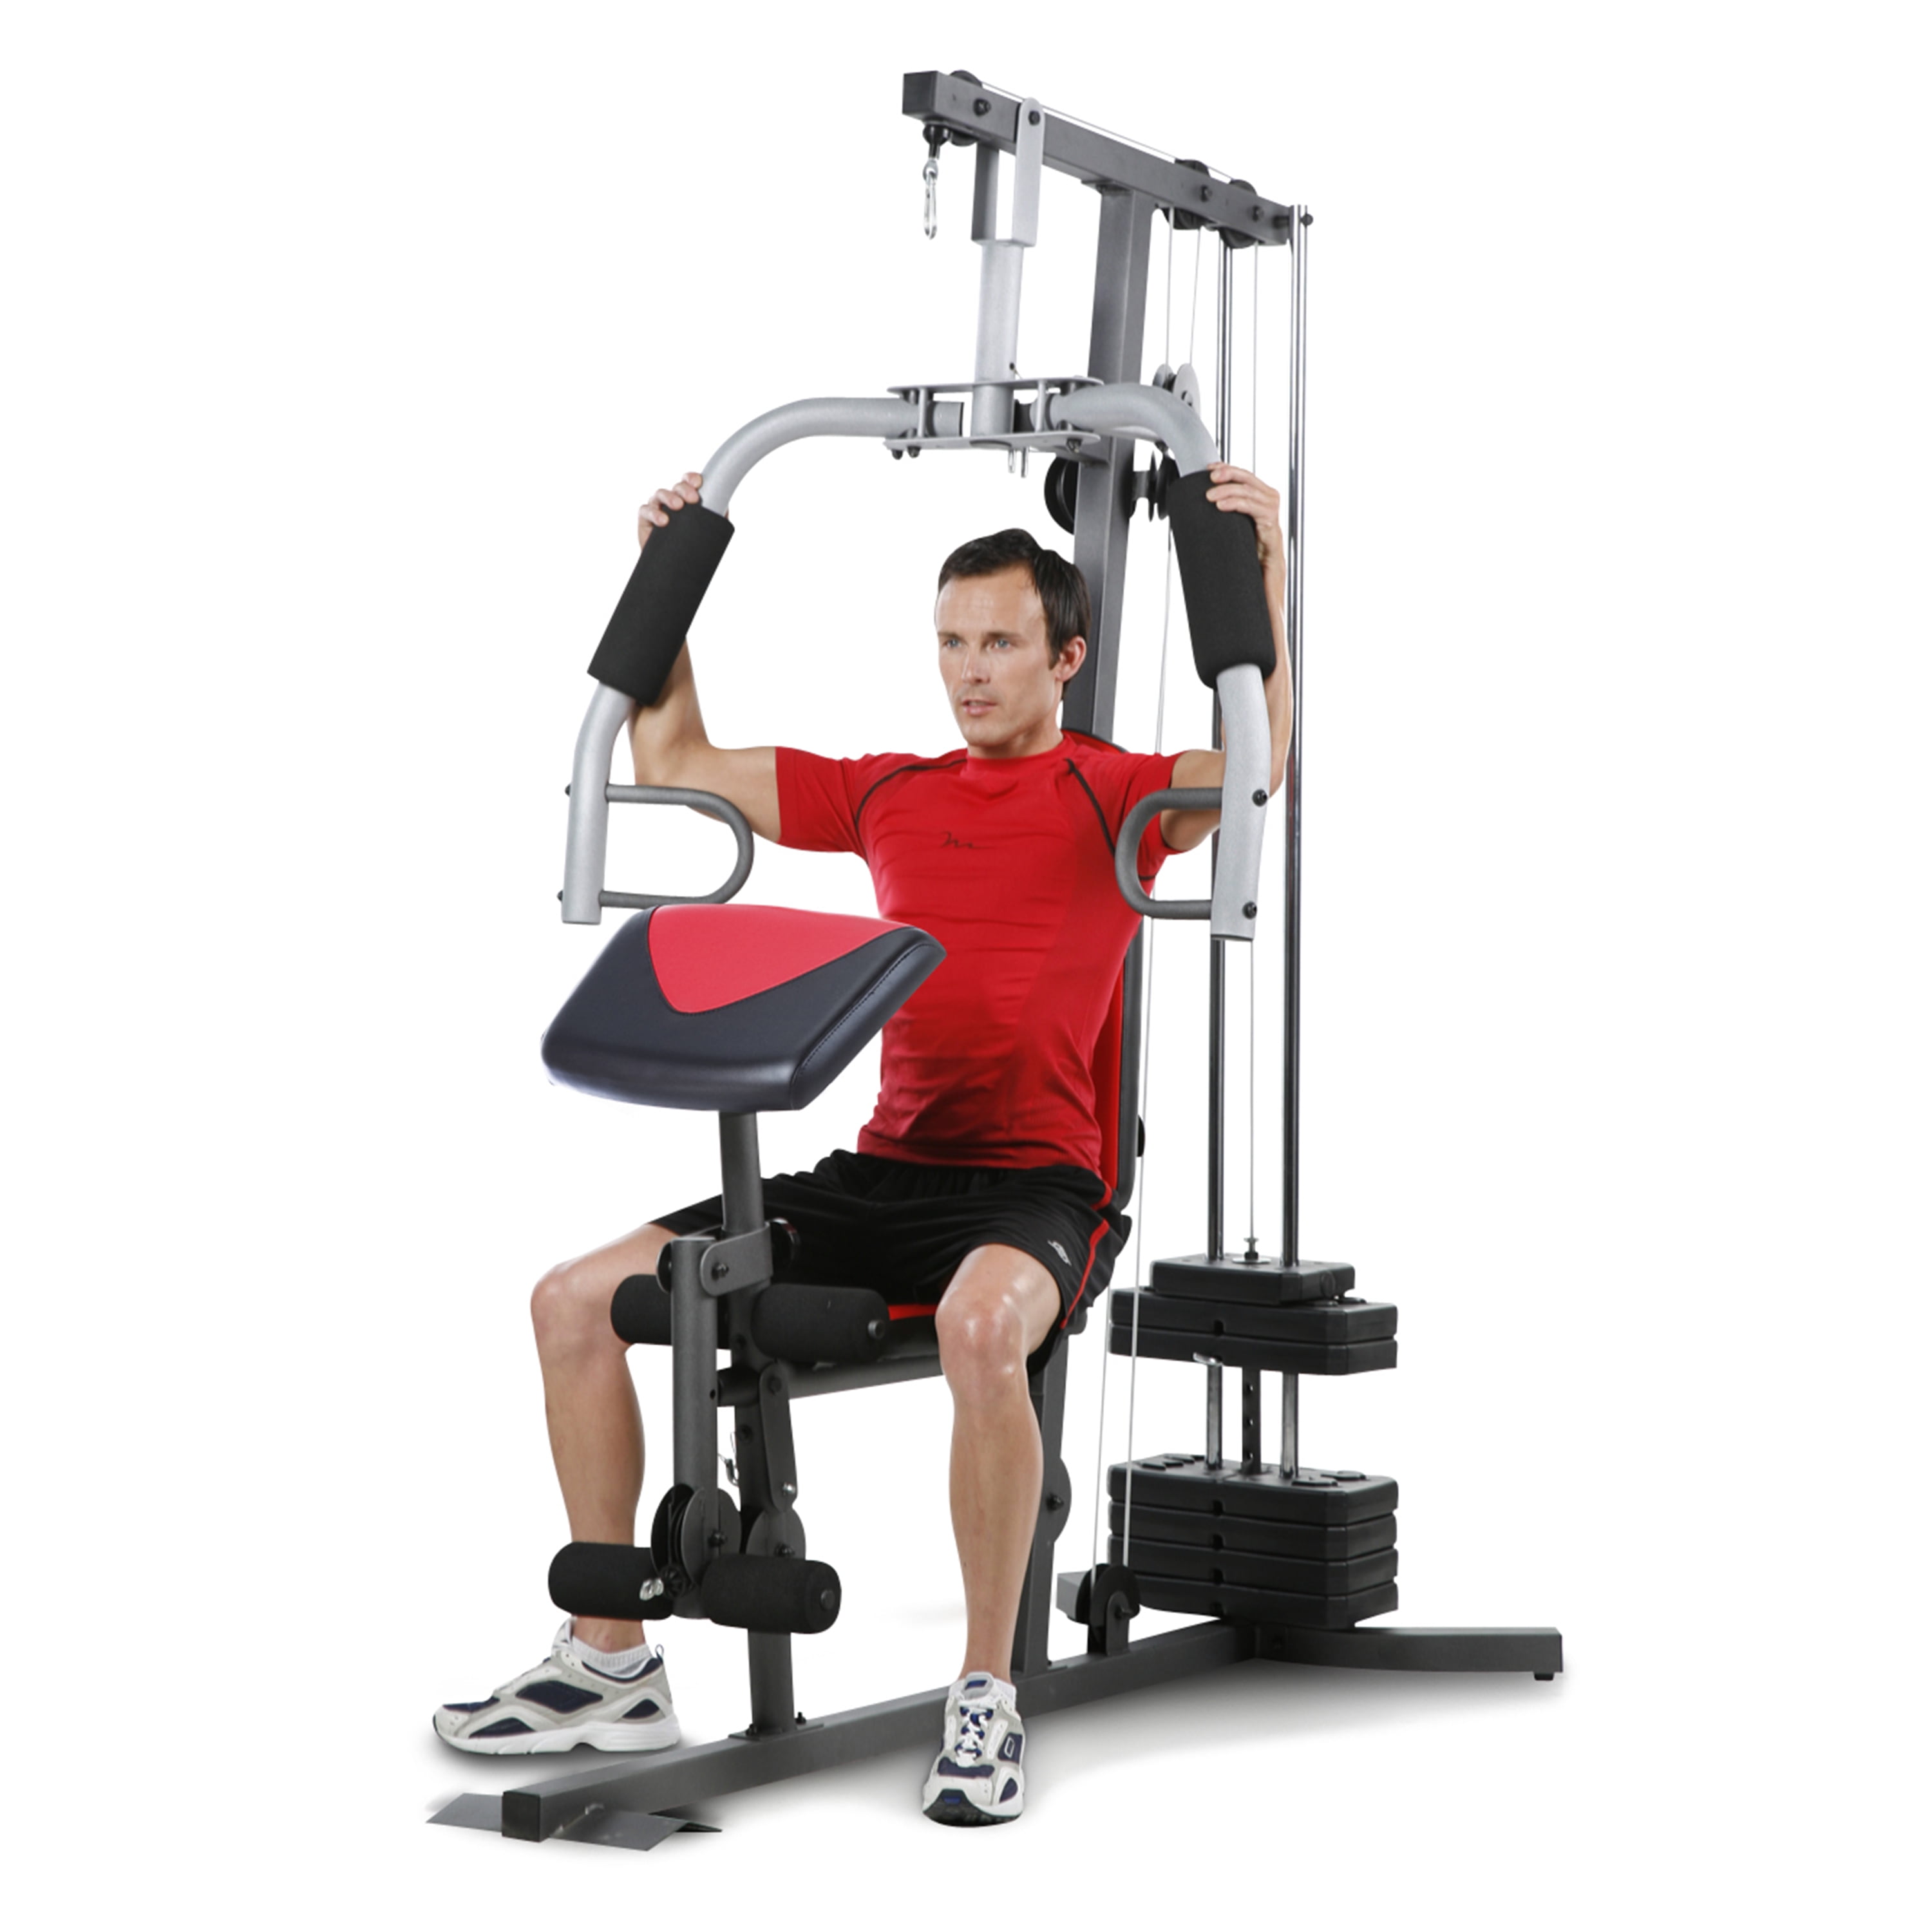 30 Minute Weider Machine Workout with Comfort Workout Clothes